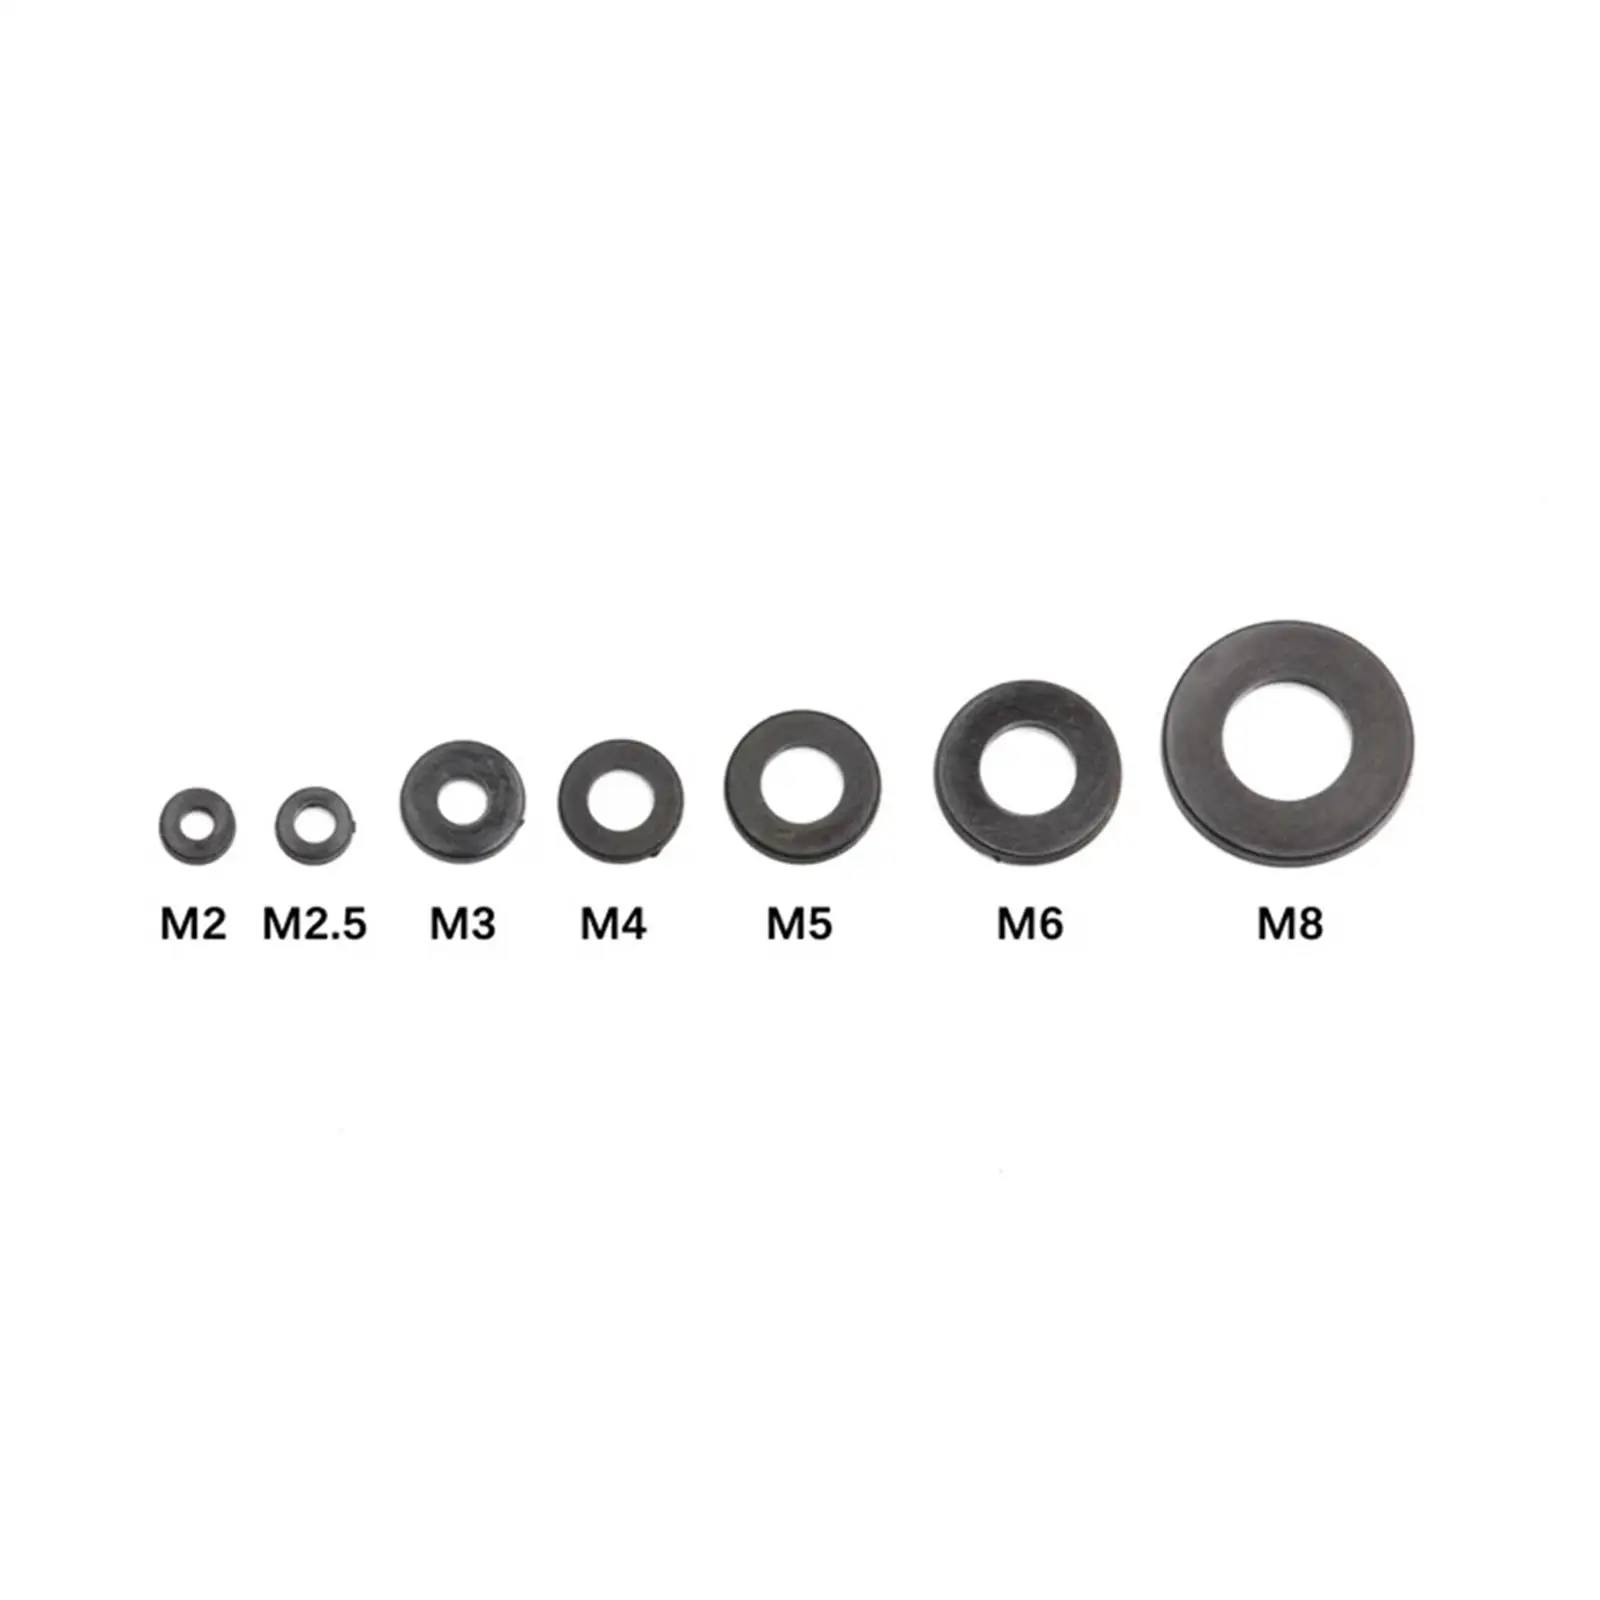 500 Pieces Washer Kit Assortment, Assorted Flat Washers Set, for Marine Auto Car Repair